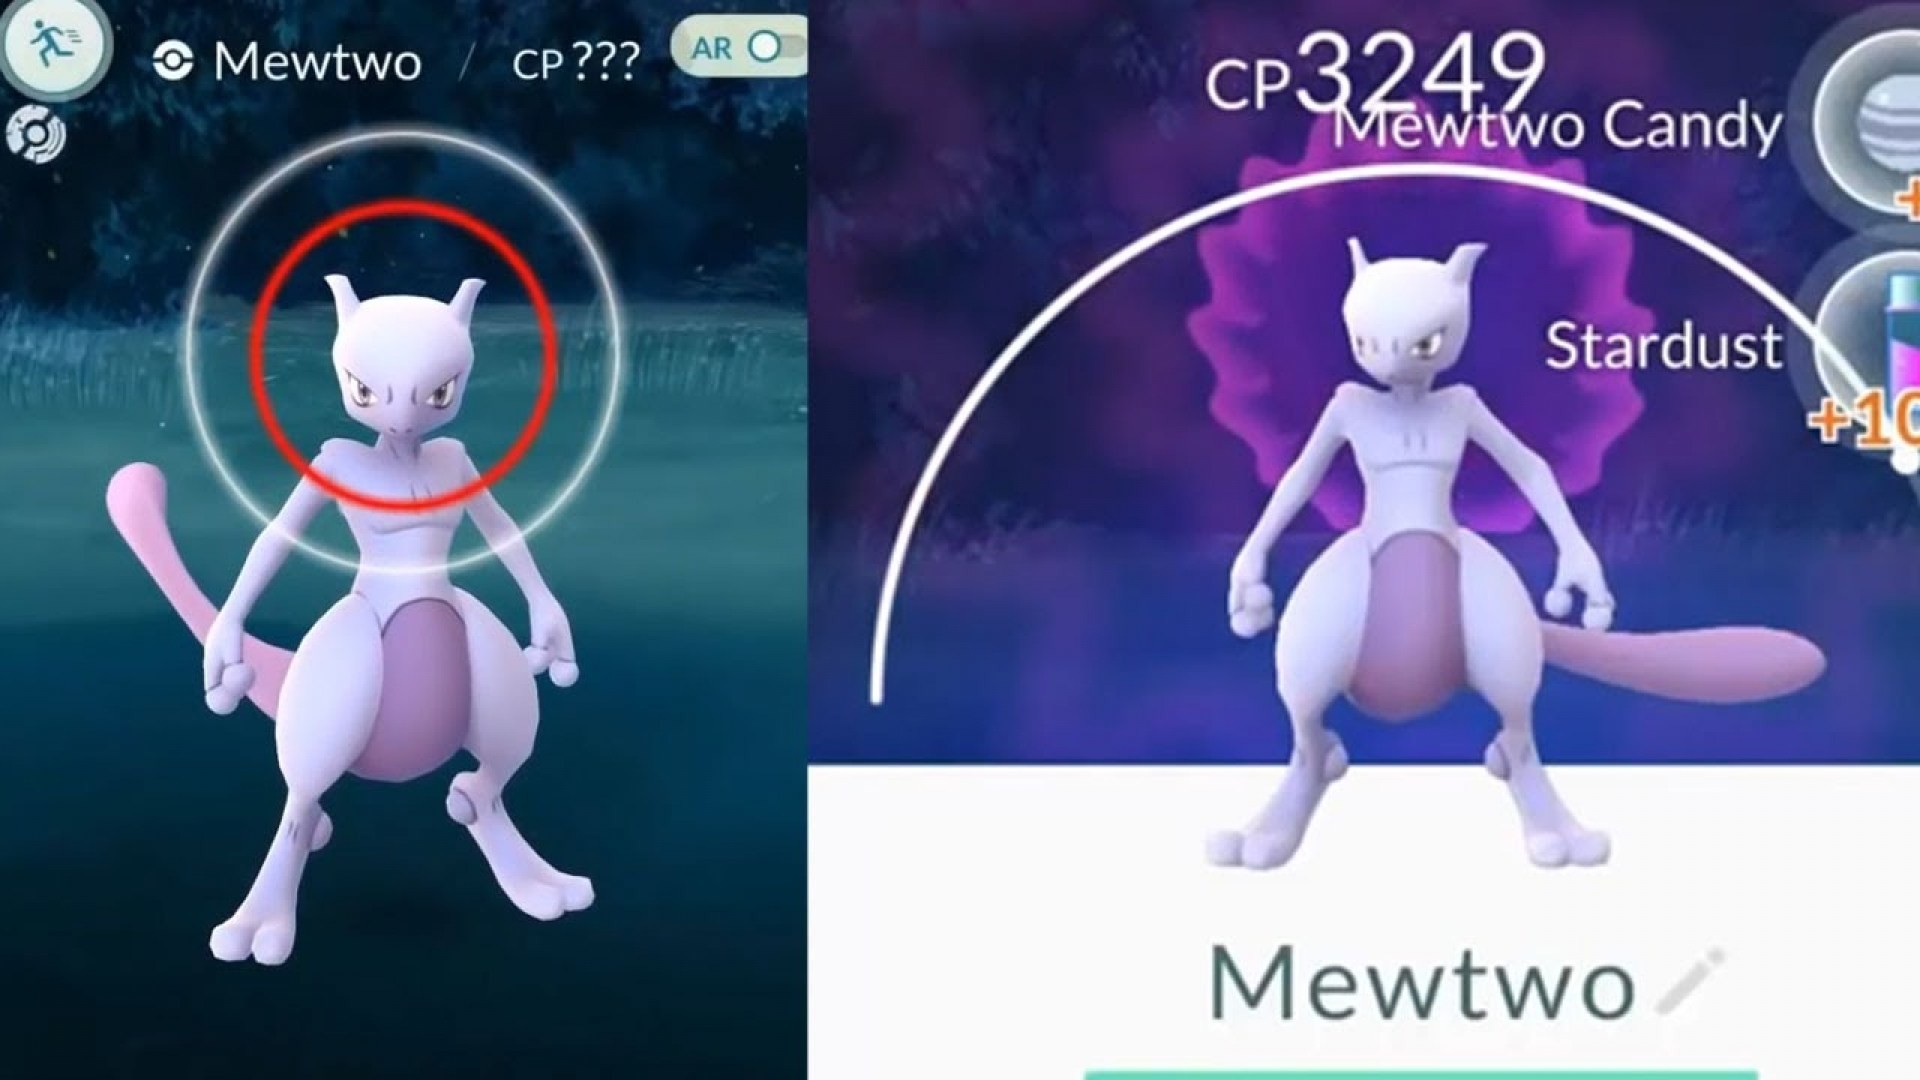 Pictures Of Pokemon Go Game Characters Mewtwo And Mew 1280720 HD Wallpapers 19201080